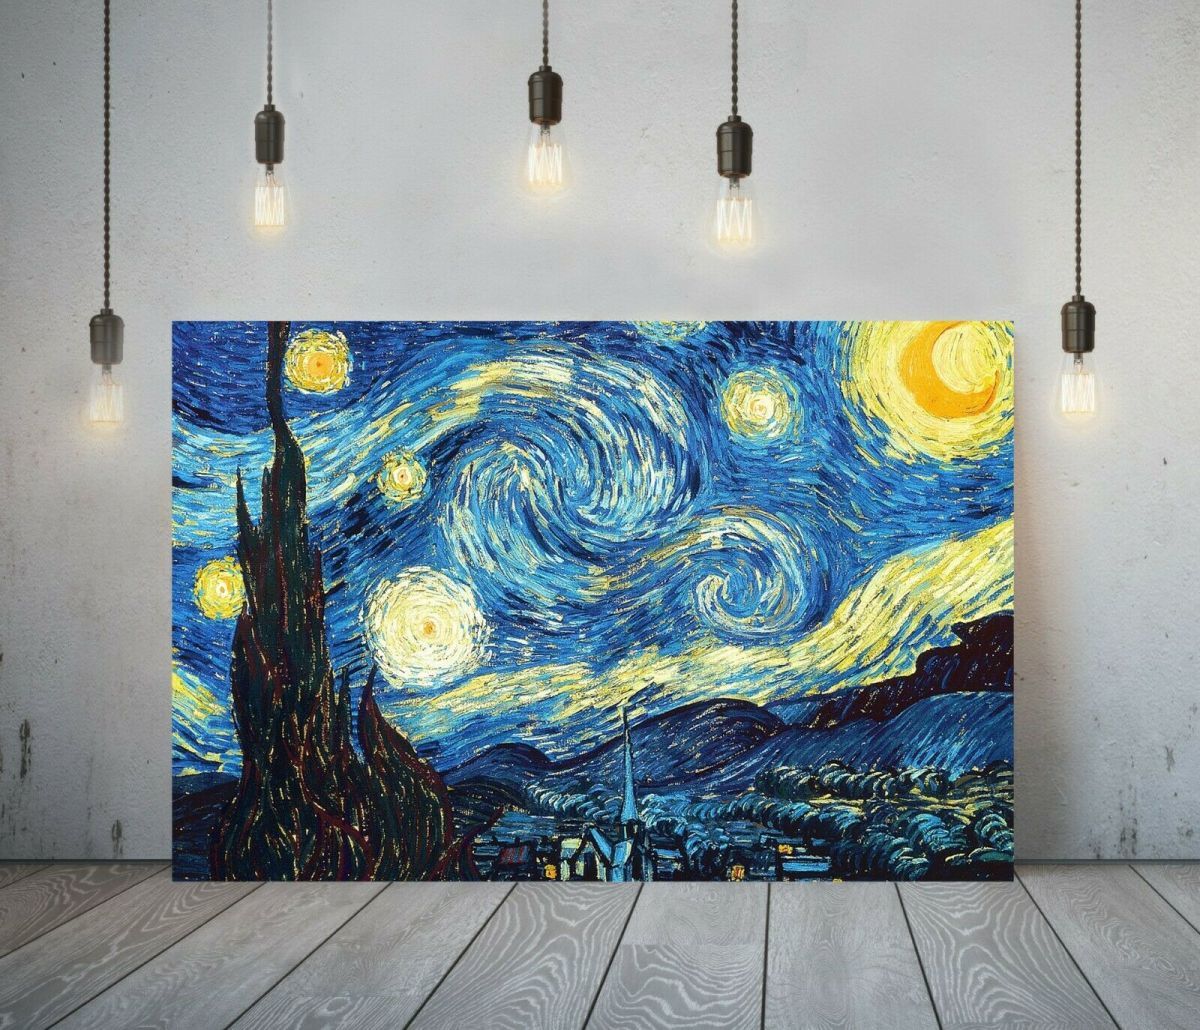 Van Gogh Starry Night Poster High Quality Canvas Framed Picture A1 Art Panel Nordic Foreign Painting Goods Interior 2, Printed materials, Poster, others